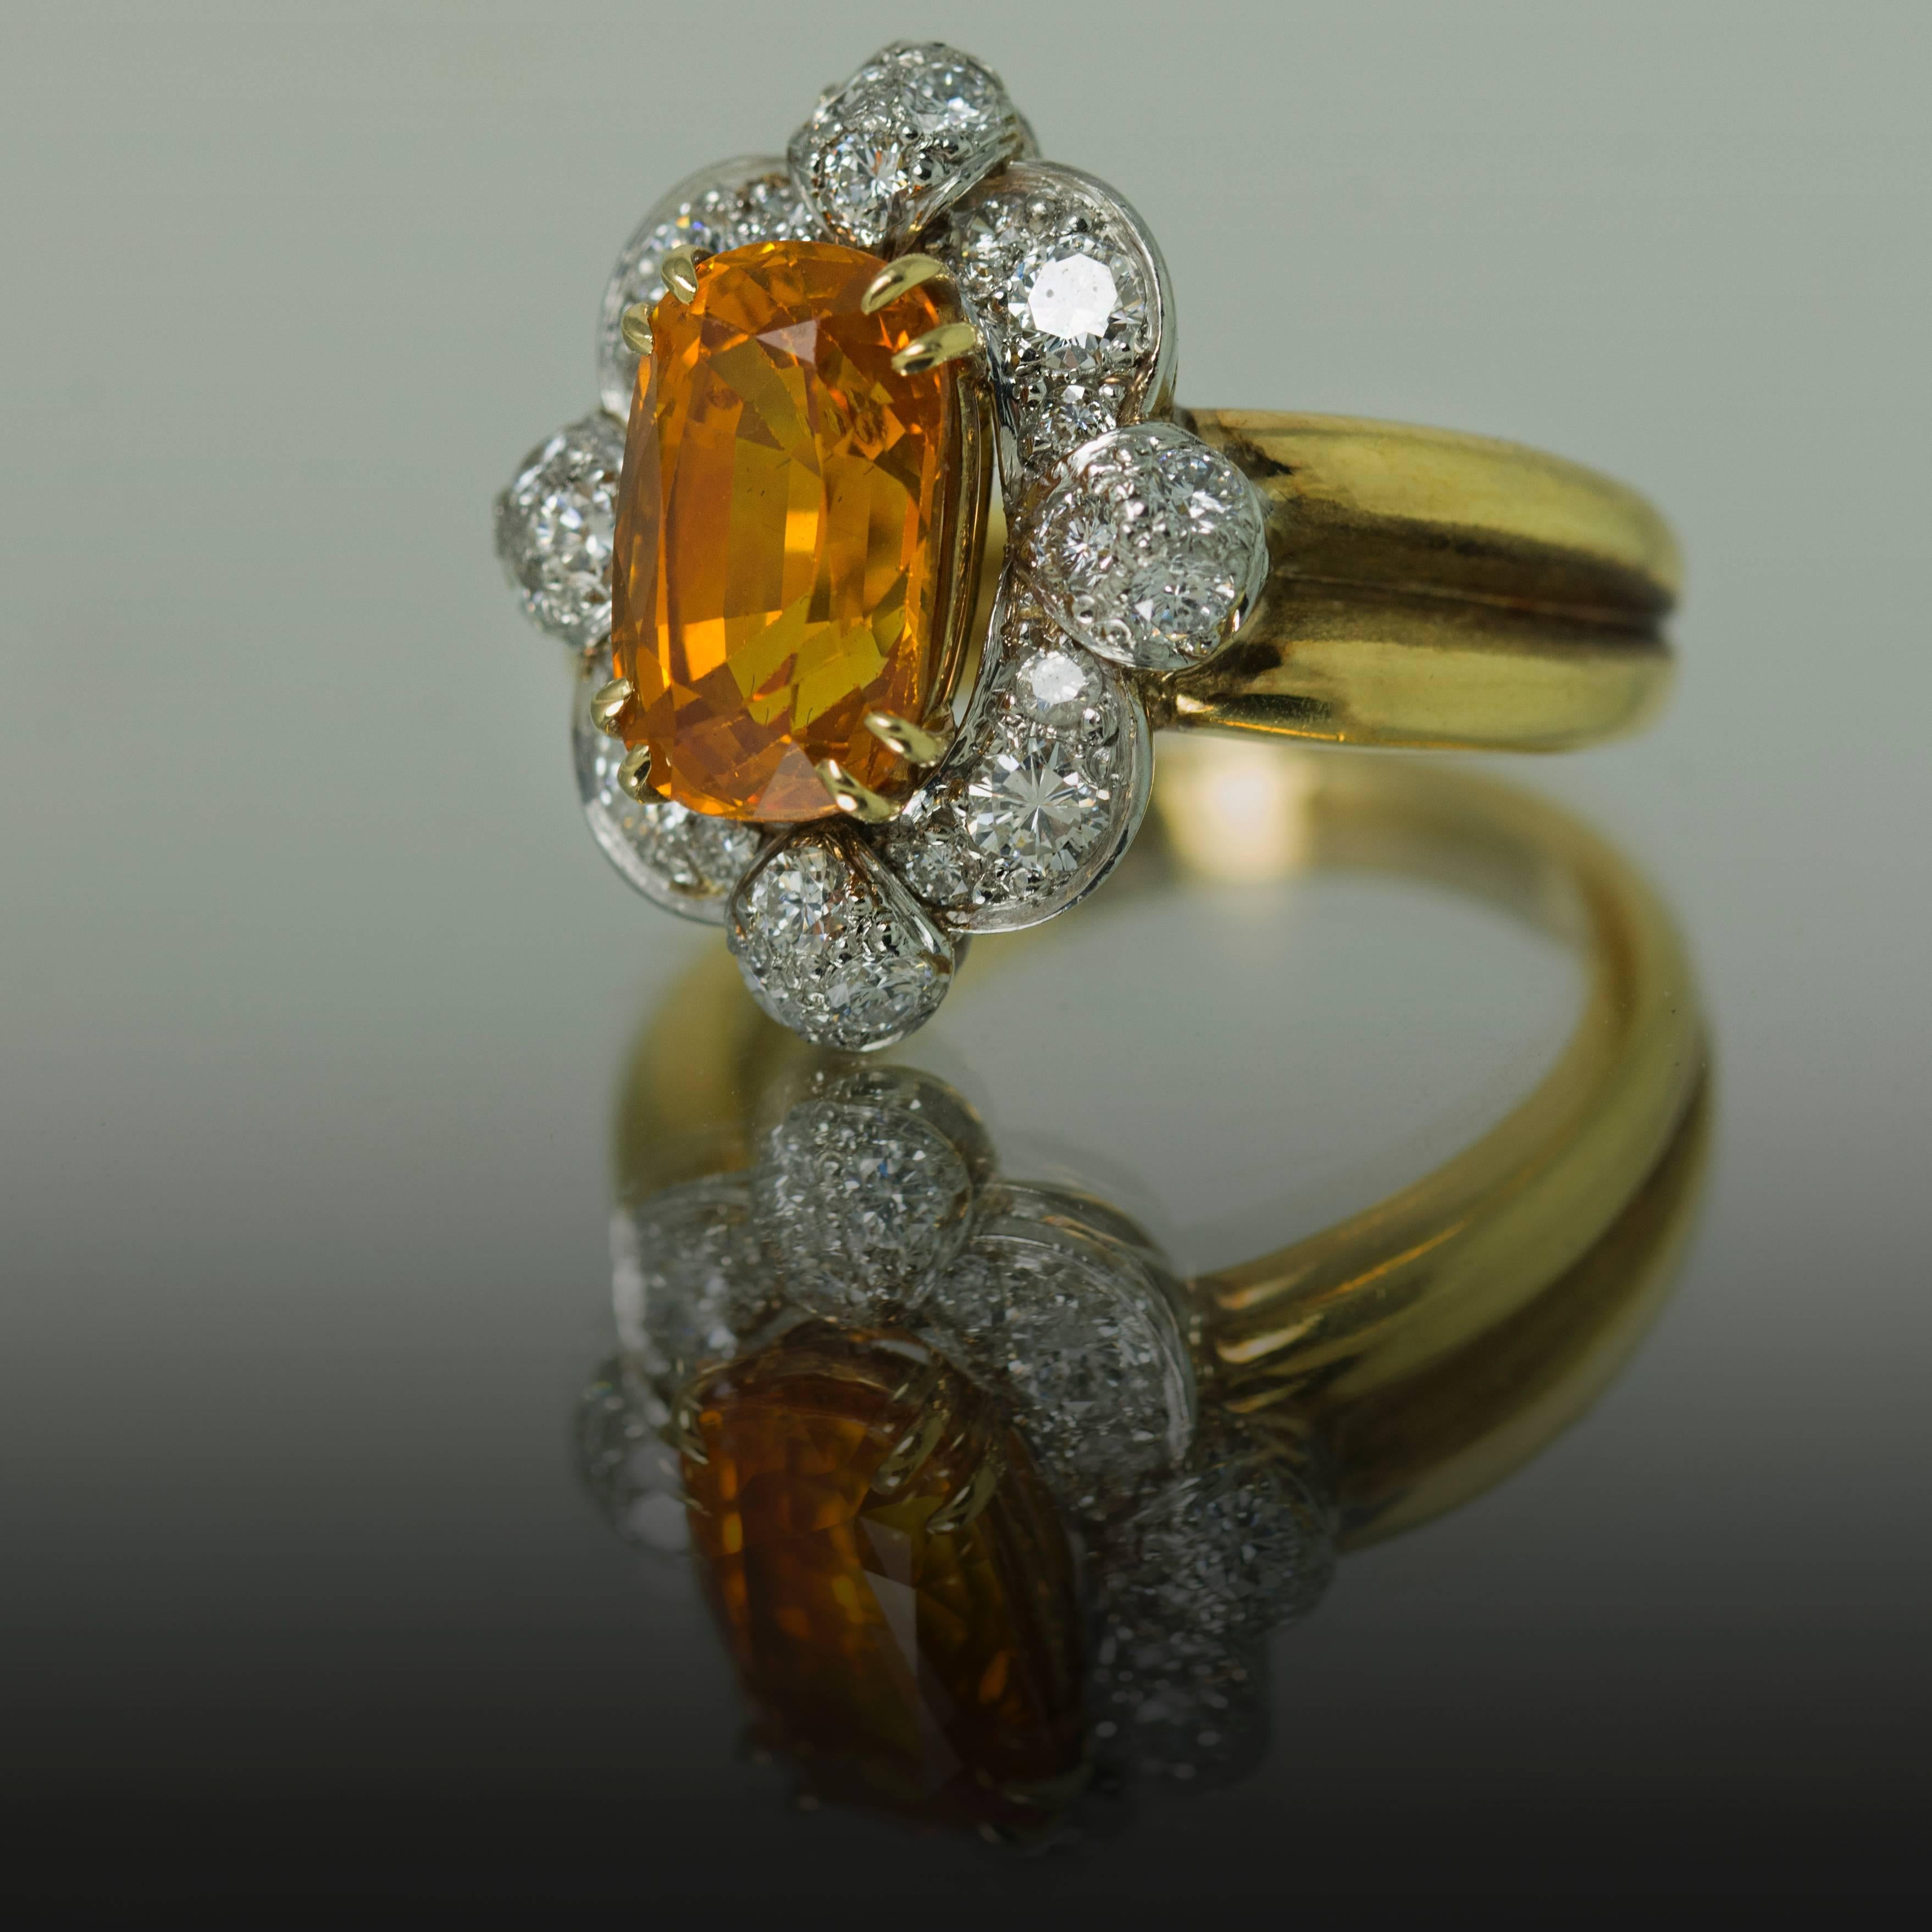 Hand Fabricated 18k Ring by Keith Davis for Thayer Jewelers. Containing one natural orange sapphire weighing 3.98 carats and round brilliant diamonds weighing 0.88 carats.  Free Ring Sizing

Keith Davis 
Before coming to the United States to do